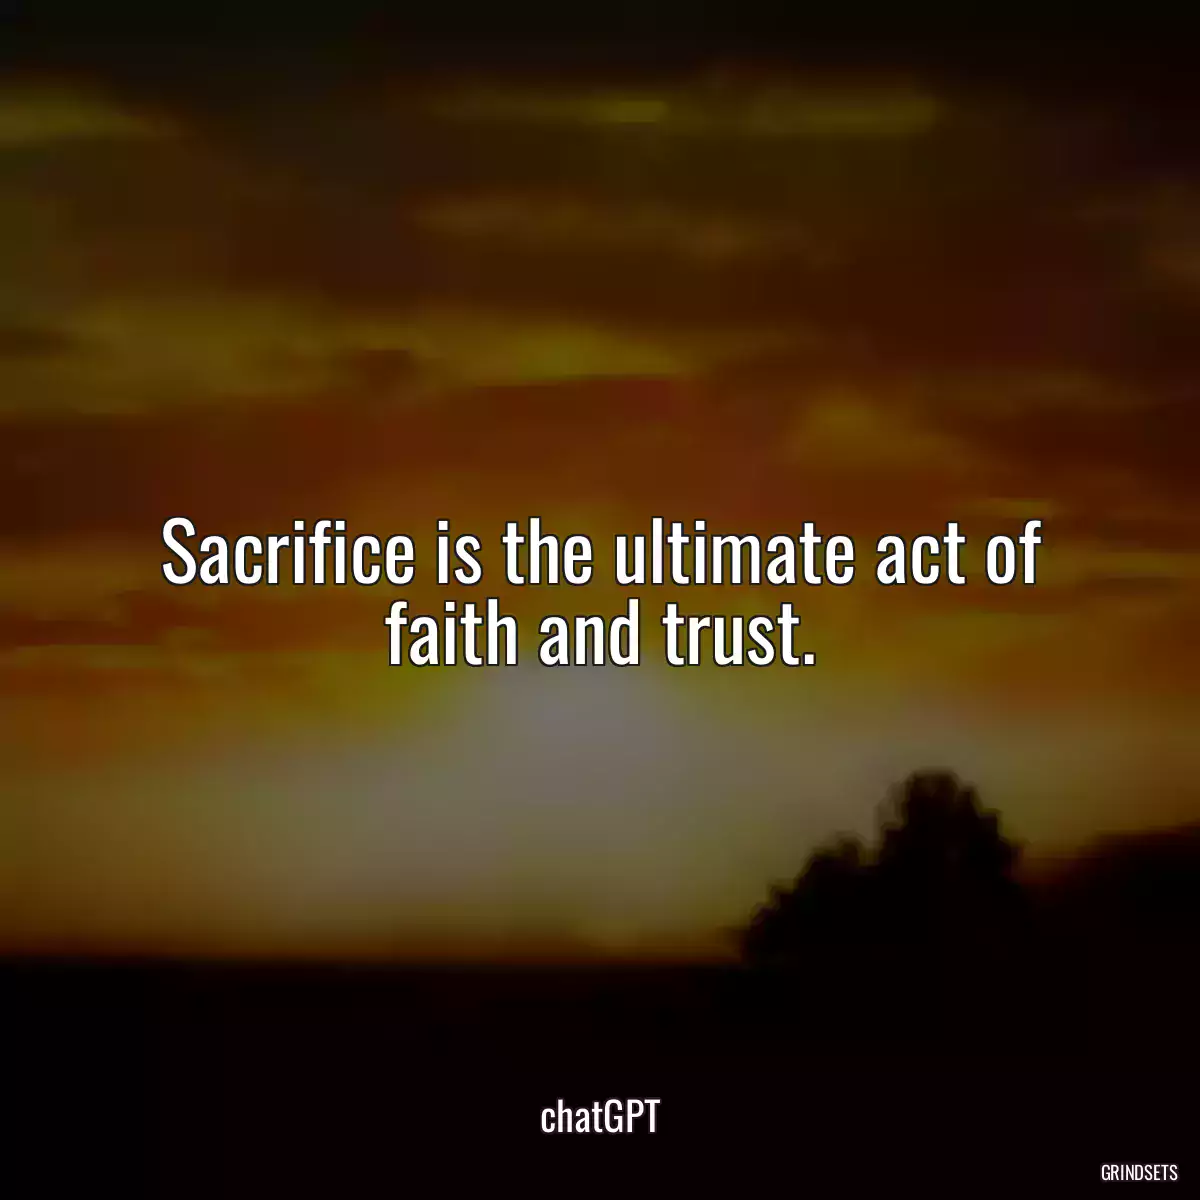 Sacrifice is the ultimate act of faith and trust.